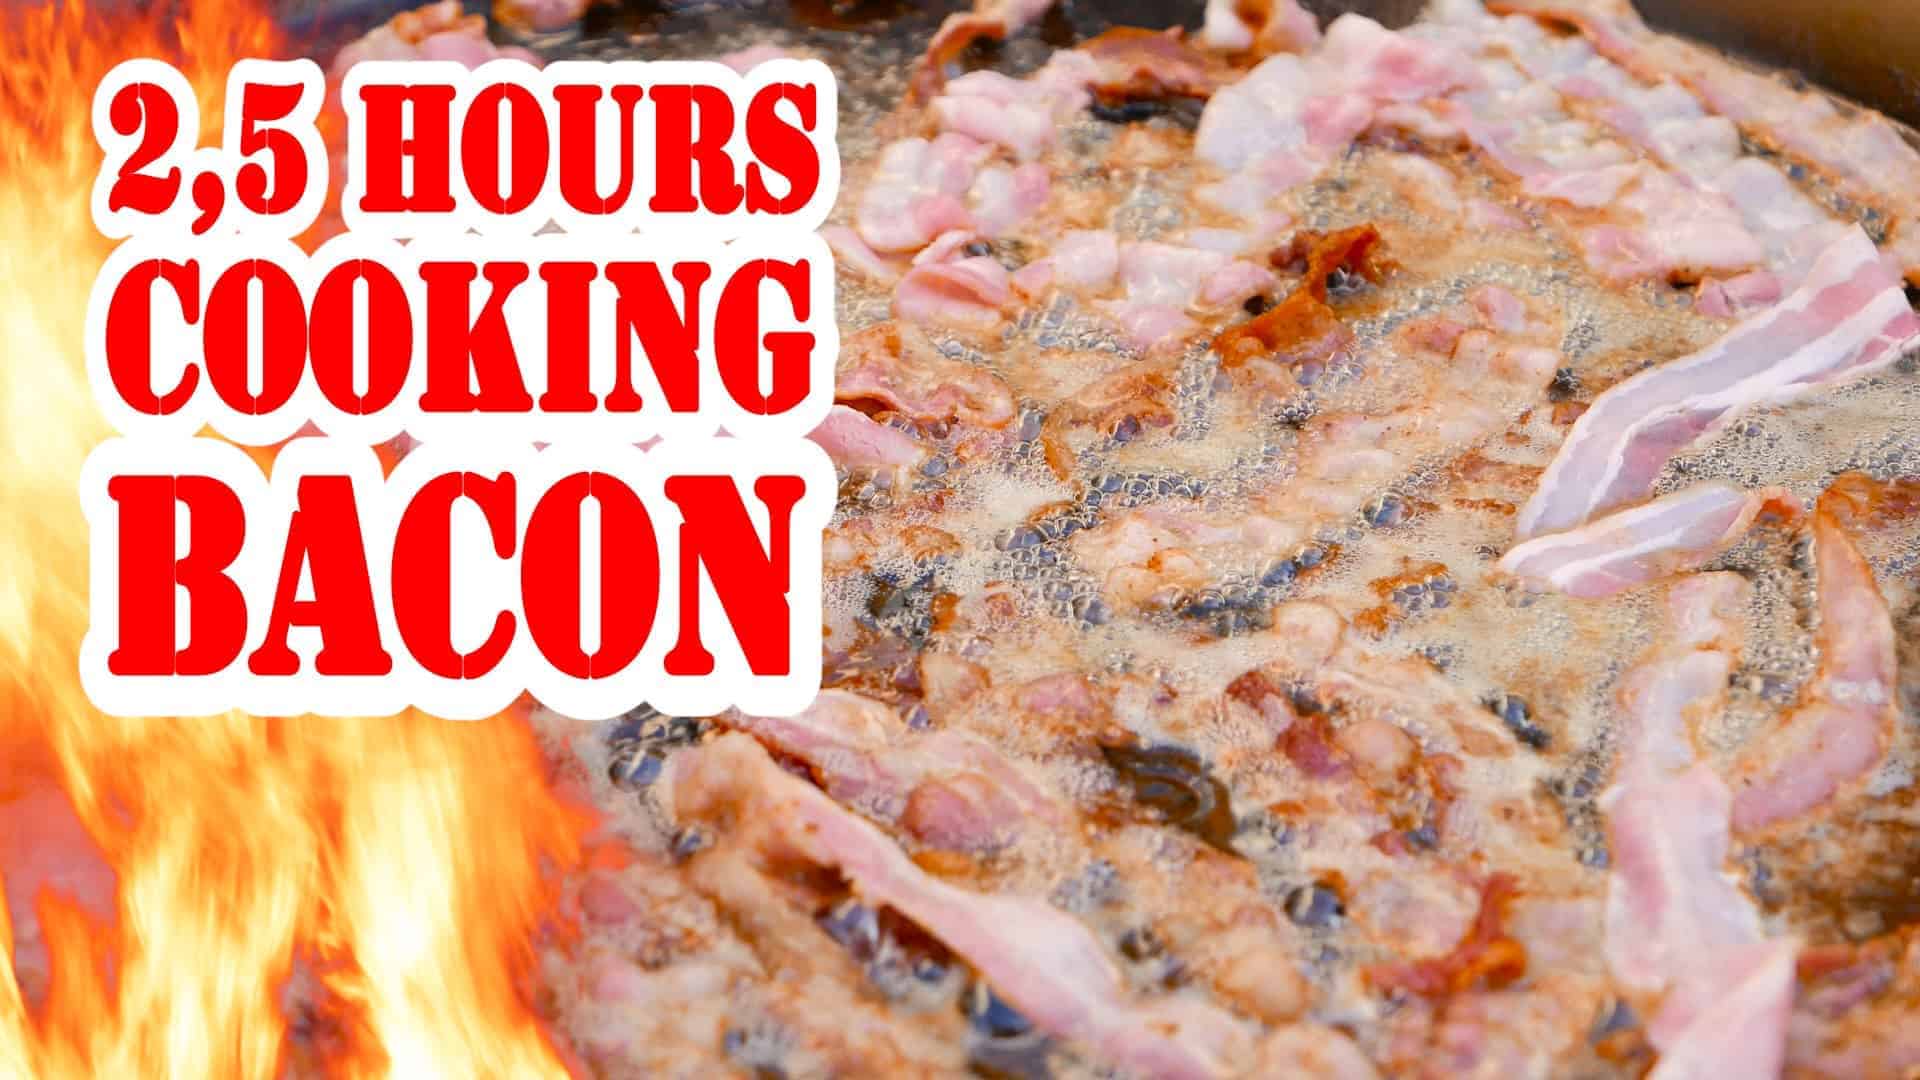 Fat Food Porn - 2,5 hours cooking Bacon - relaxation video - ASMR Video - Die Grillshow  Special